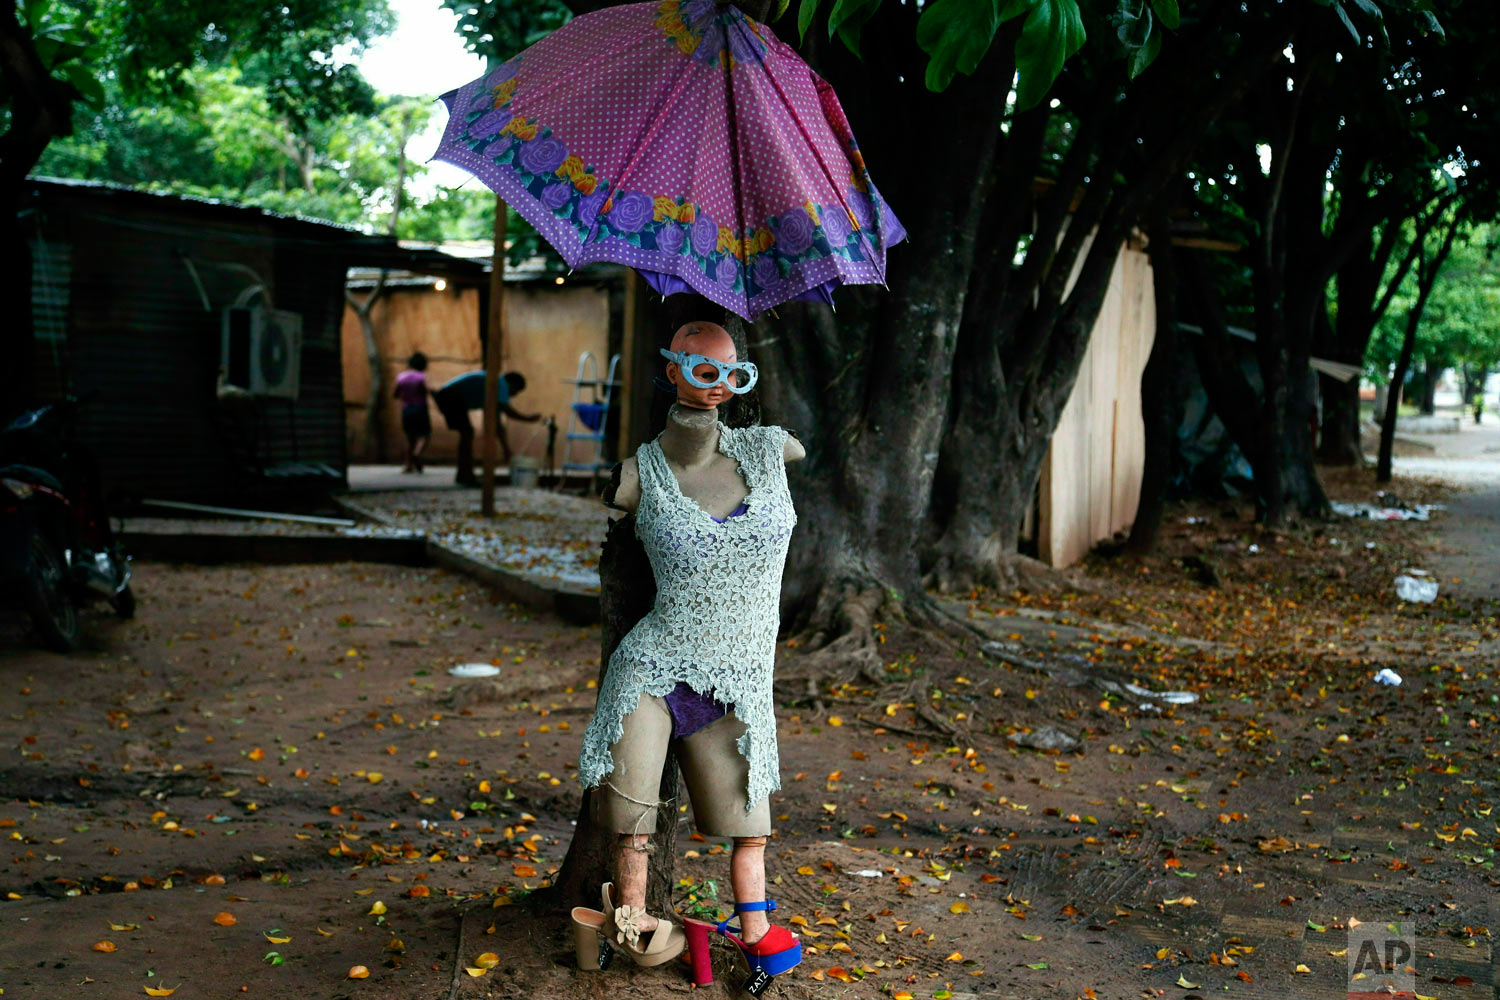  A dressed up mannequin dubbed "Miss Evacuated" placed there by an evacuee stands outside a shelter in Asuncion, Paraguay, Tuesday, May 7, 2019, for people who were forced to evacuate their homes due to flooding caused by heavy rains. (AP Photo/Jorge